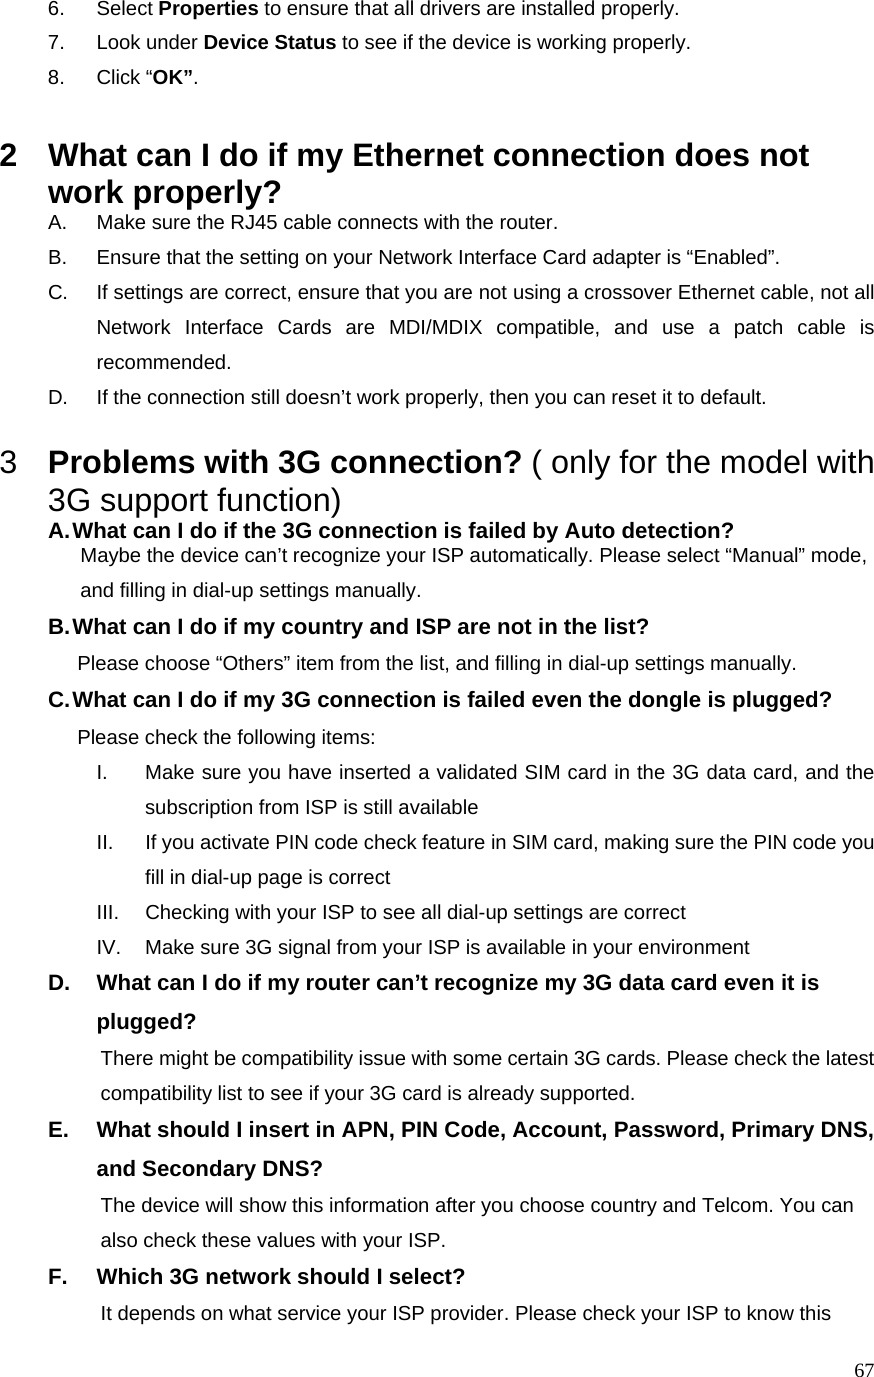  676. Select Properties to ensure that all drivers are installed properly. 7. Look under Device Status to see if the device is working properly. 8. Click “OK”.  2  What can I do if my Ethernet connection does not work properly? A.  Make sure the RJ45 cable connects with the router. B.  Ensure that the setting on your Network Interface Card adapter is “Enabled”. C.  If settings are correct, ensure that you are not using a crossover Ethernet cable, not all Network Interface Cards are MDI/MDIX compatible, and use a patch cable is recommended. D.  If the connection still doesn’t work properly, then you can reset it to default.      3  Problems with 3G connection? ( only for the model with 3G support function) A. What can I do if the 3G connection is failed by Auto detection?           Maybe the device can’t recognize your ISP automatically. Please select “Manual” mode,                       and filling in dial-up settings manually. B. What can I do if my country and ISP are not in the list?        Please choose “Others” item from the list, and filling in dial-up settings manually. C. What can I do if my 3G connection is failed even the dongle is plugged?        Please check the following items: I.  Make sure you have inserted a validated SIM card in the 3G data card, and the subscription from ISP is still available II.  If you activate PIN code check feature in SIM card, making sure the PIN code you fill in dial-up page is correct III.  Checking with your ISP to see all dial-up settings are correct IV.  Make sure 3G signal from your ISP is available in your environment D.  What can I do if my router can’t recognize my 3G data card even it is plugged?           There might be compatibility issue with some certain 3G cards. Please check the latest                           compatibility list to see if your 3G card is already supported. E.  What should I insert in APN, PIN Code, Account, Password, Primary DNS, and Secondary DNS?                     The device will show this information after you choose country and Telcom. You can                   also check these values with your ISP. F.  Which 3G network should I select?                     It depends on what service your ISP provider. Please check your ISP to know this   